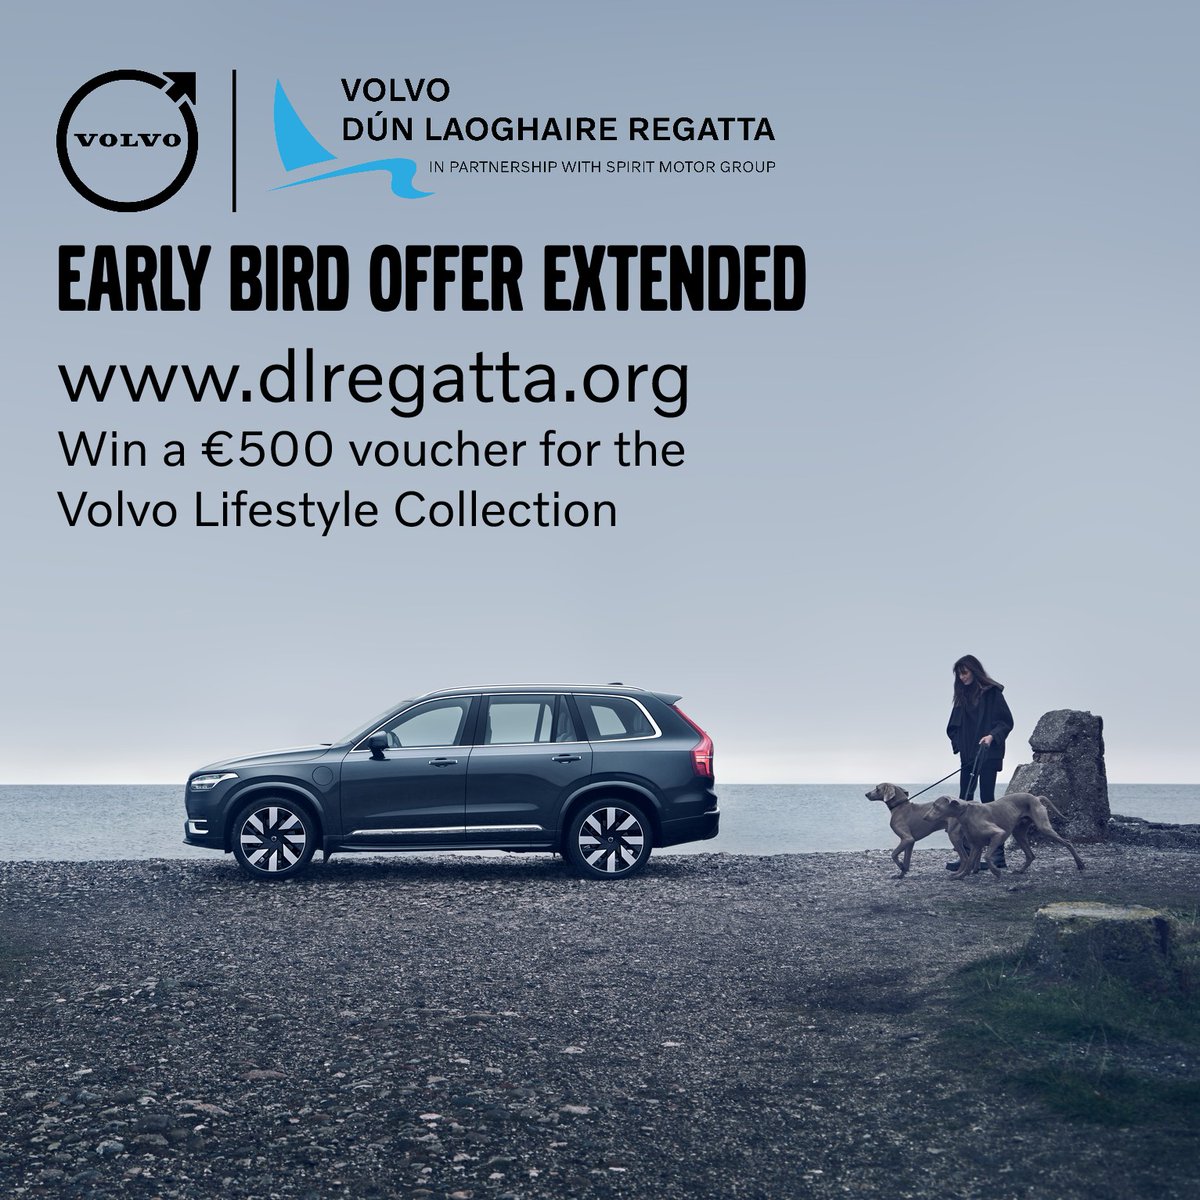 EARLY BIRD EXTENDED

The discount now closes at midnight Sunday April 16th.  All entries received by this time will be entered in to a draw with the winner receiving a €500 voucher for the Volvo Lifestyle Collection .

bit.ly/enterVDLR2023 #VDLR2023